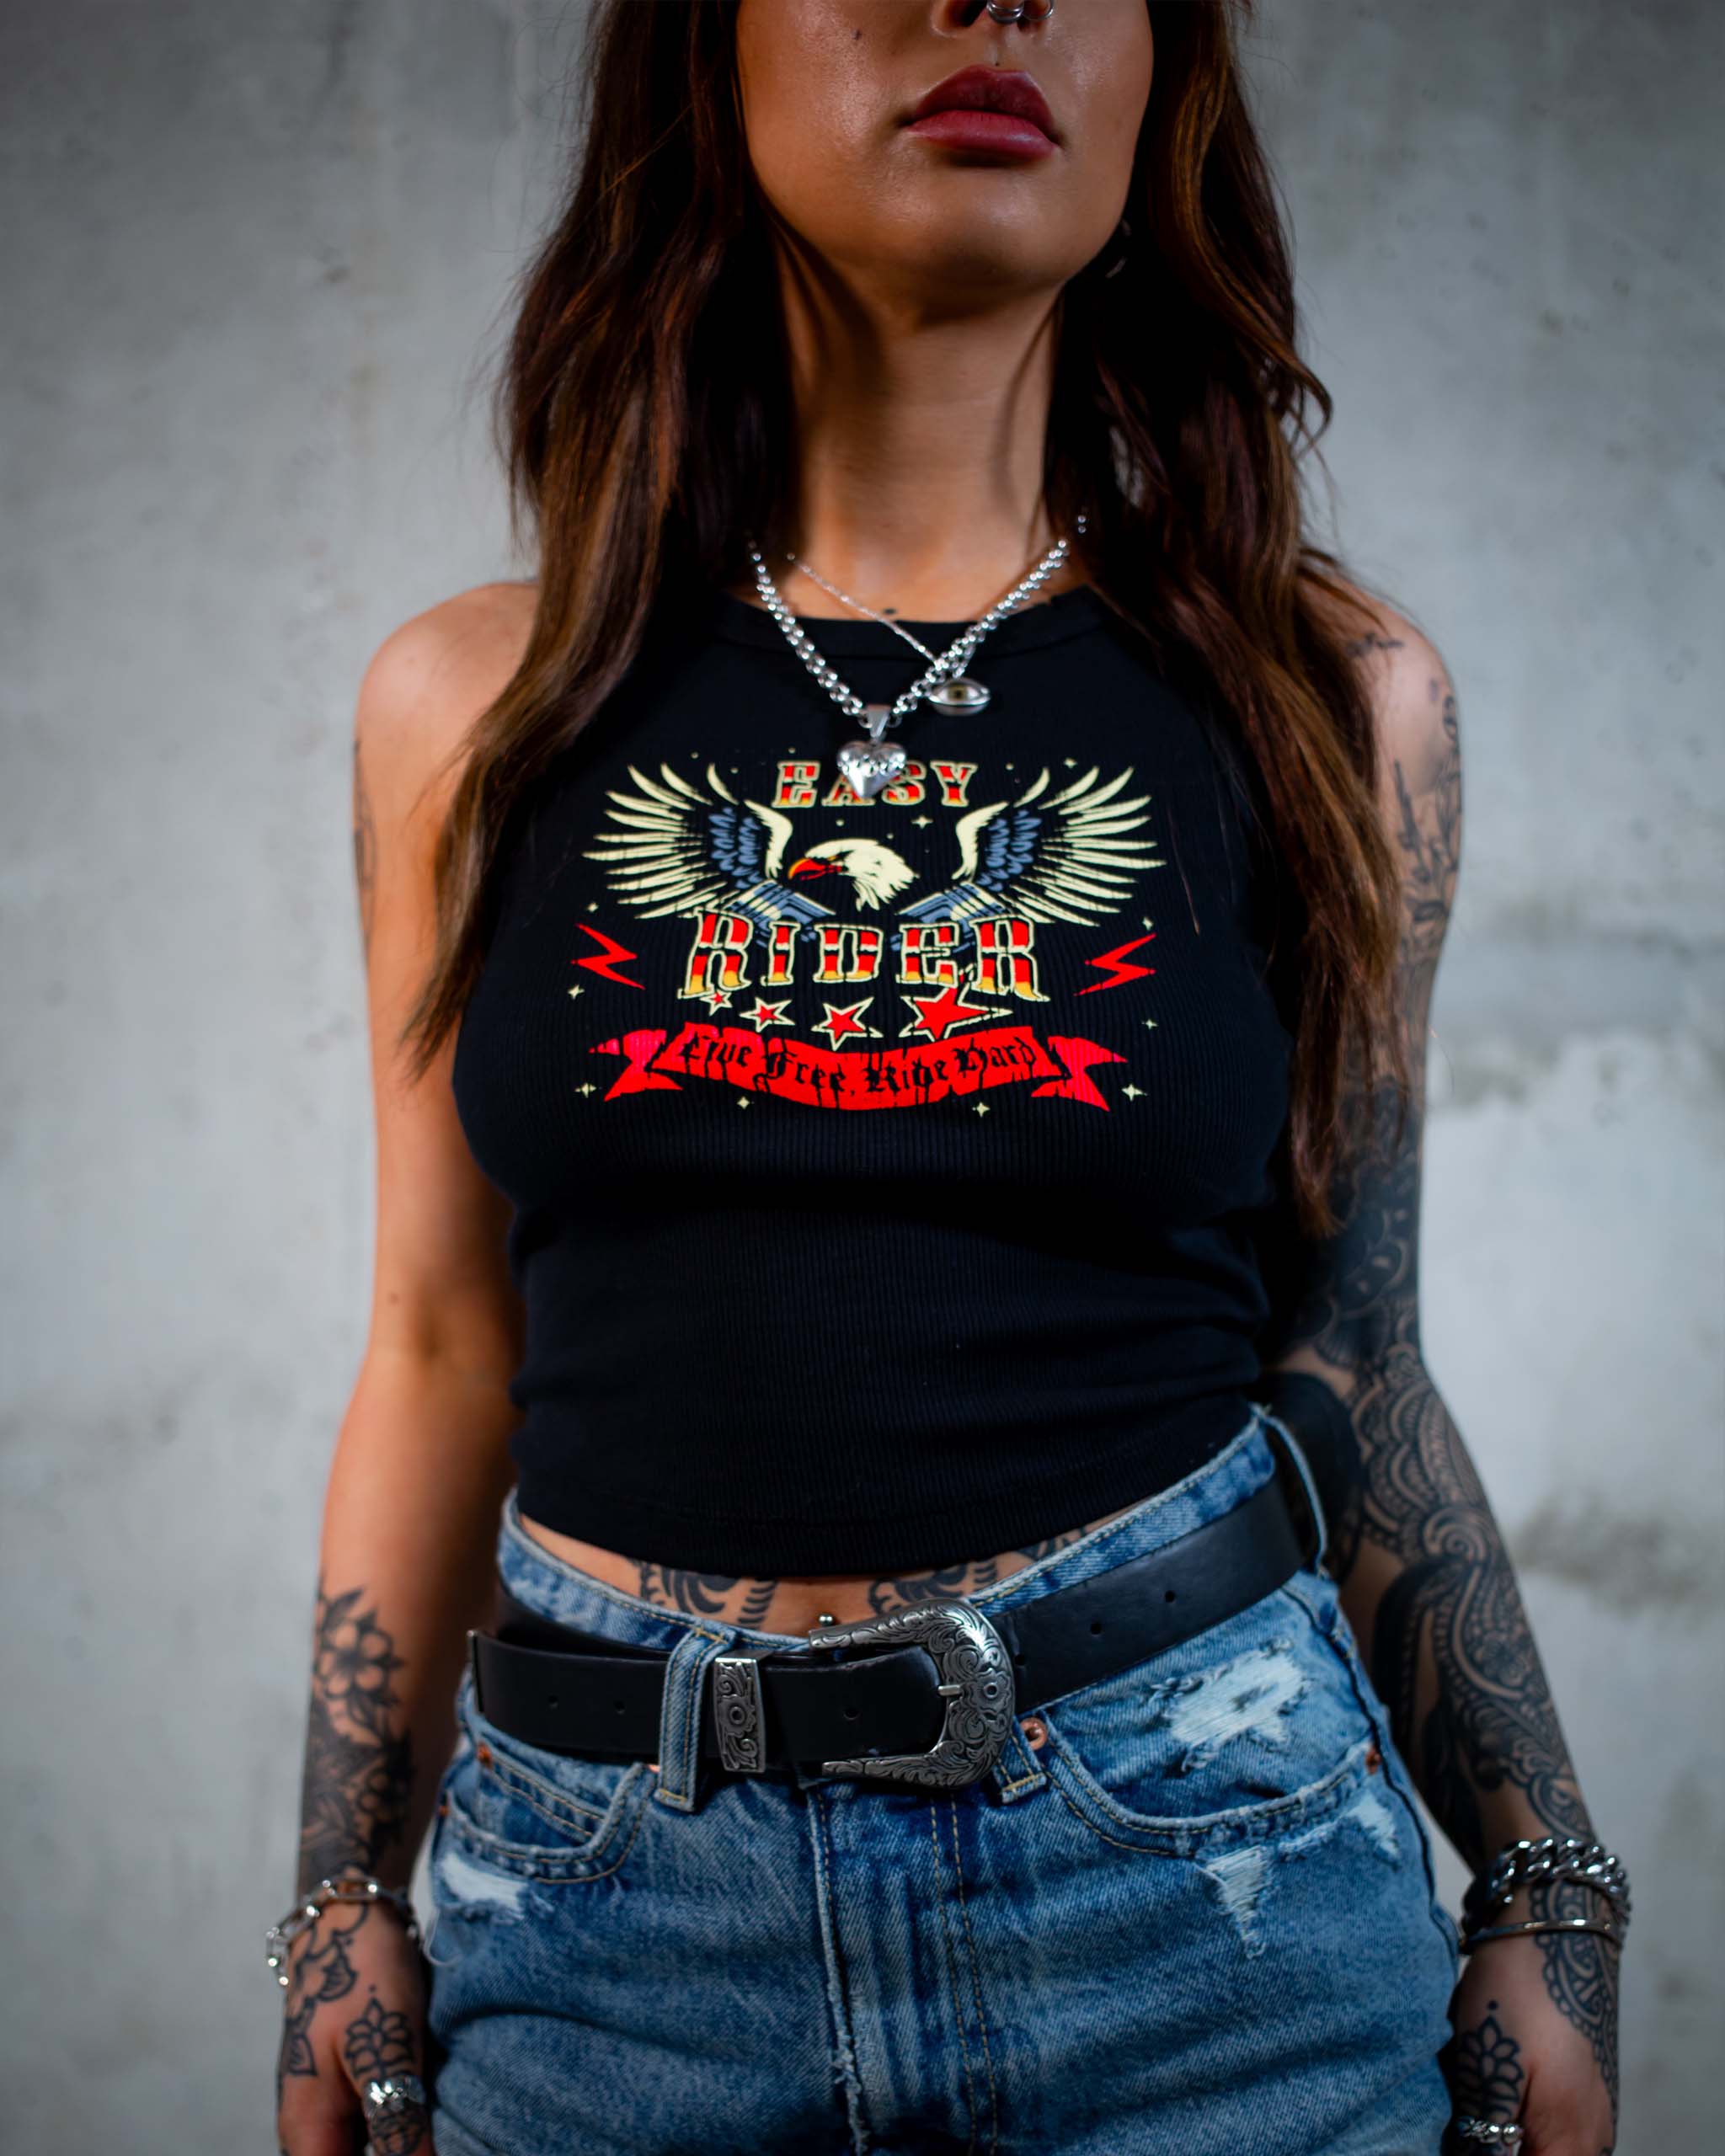 The Easy Rider biker tank top by Sleazy Rider, featuring an eagle and a motorbike engine. 